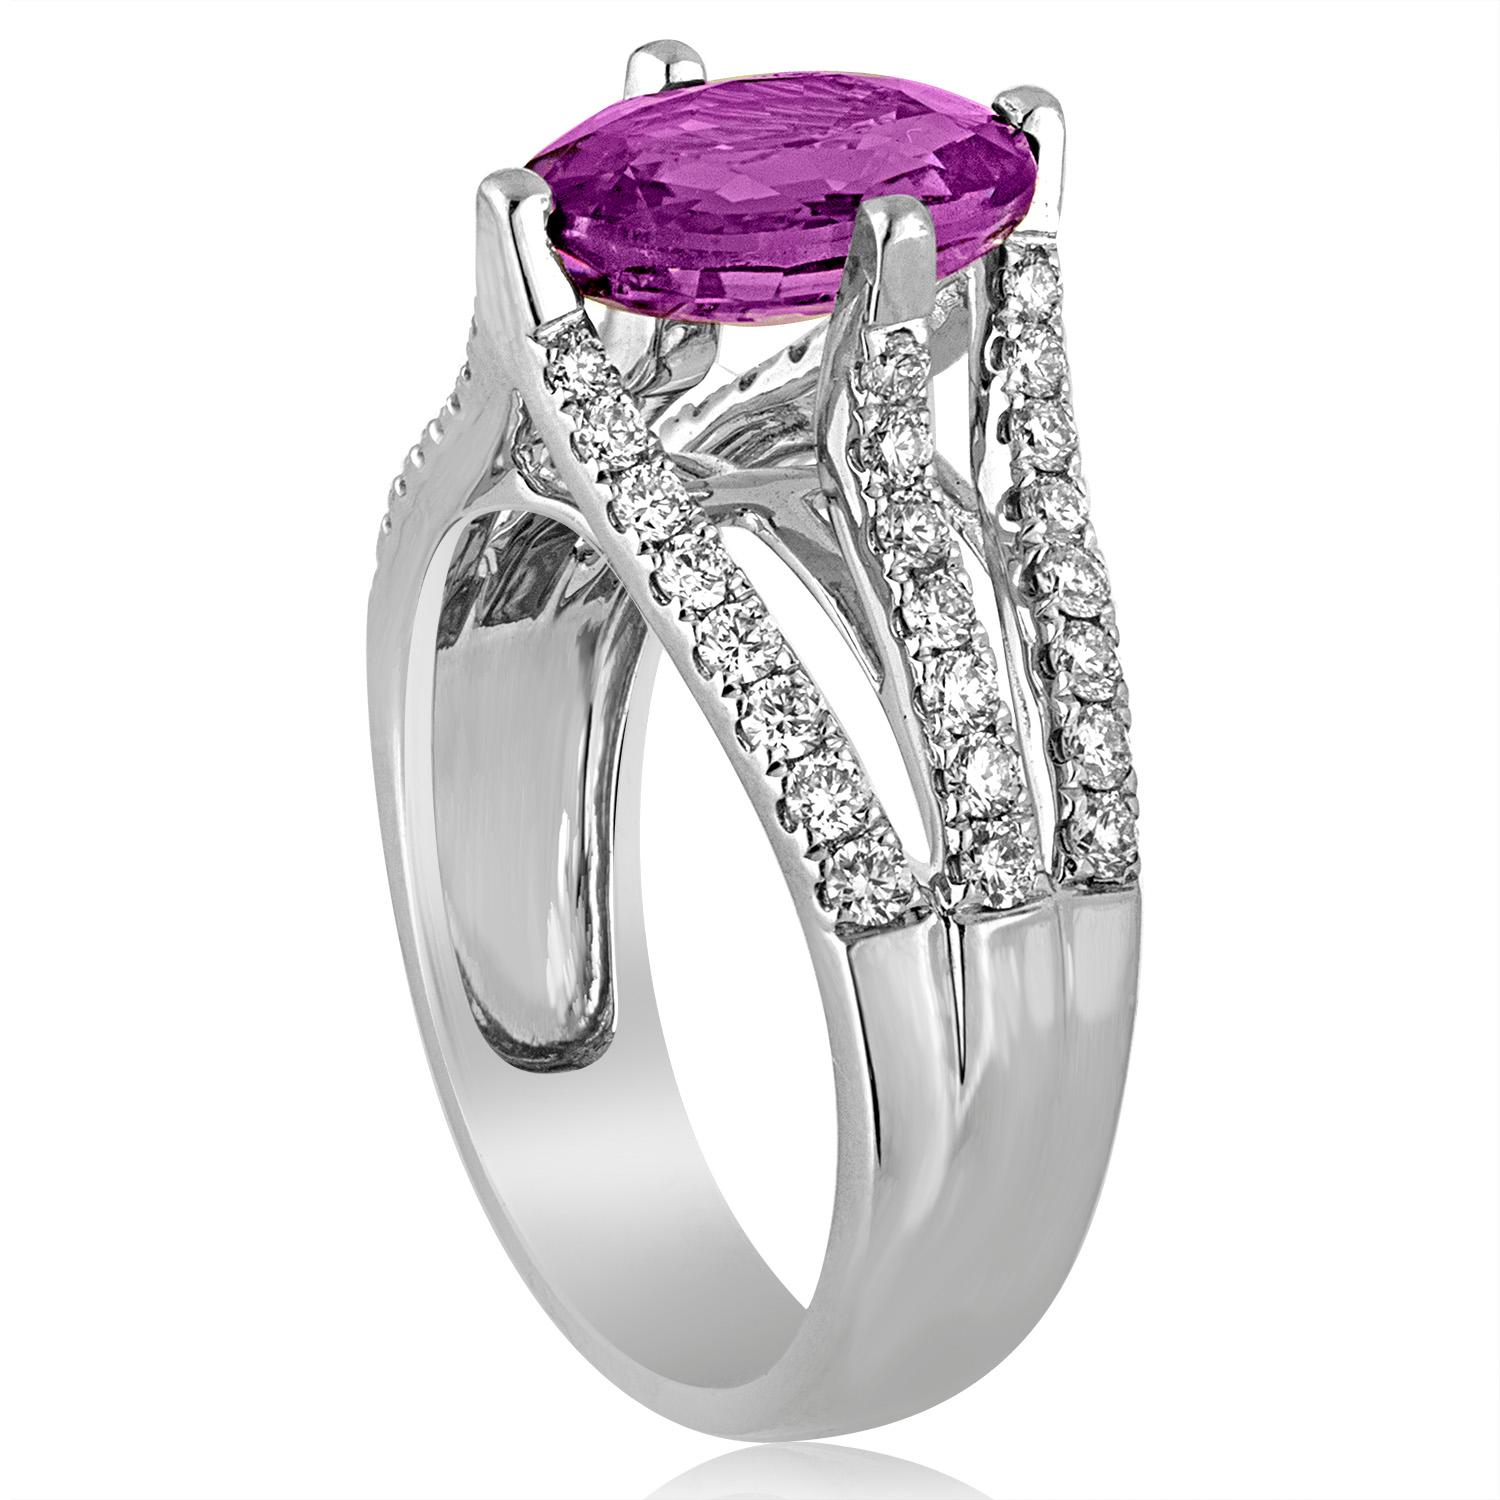 Very Stunning Sapphire Ring
The ring is 18K White Gold
The center stone is an Oval 2.86 Carat Purple Pink Sapphire
The sapphire has NO HEAT and is certified by AGL.
There are 0.60 Carats in Diamonds F VS
The ring is a size 5.75, sizable.
The ring